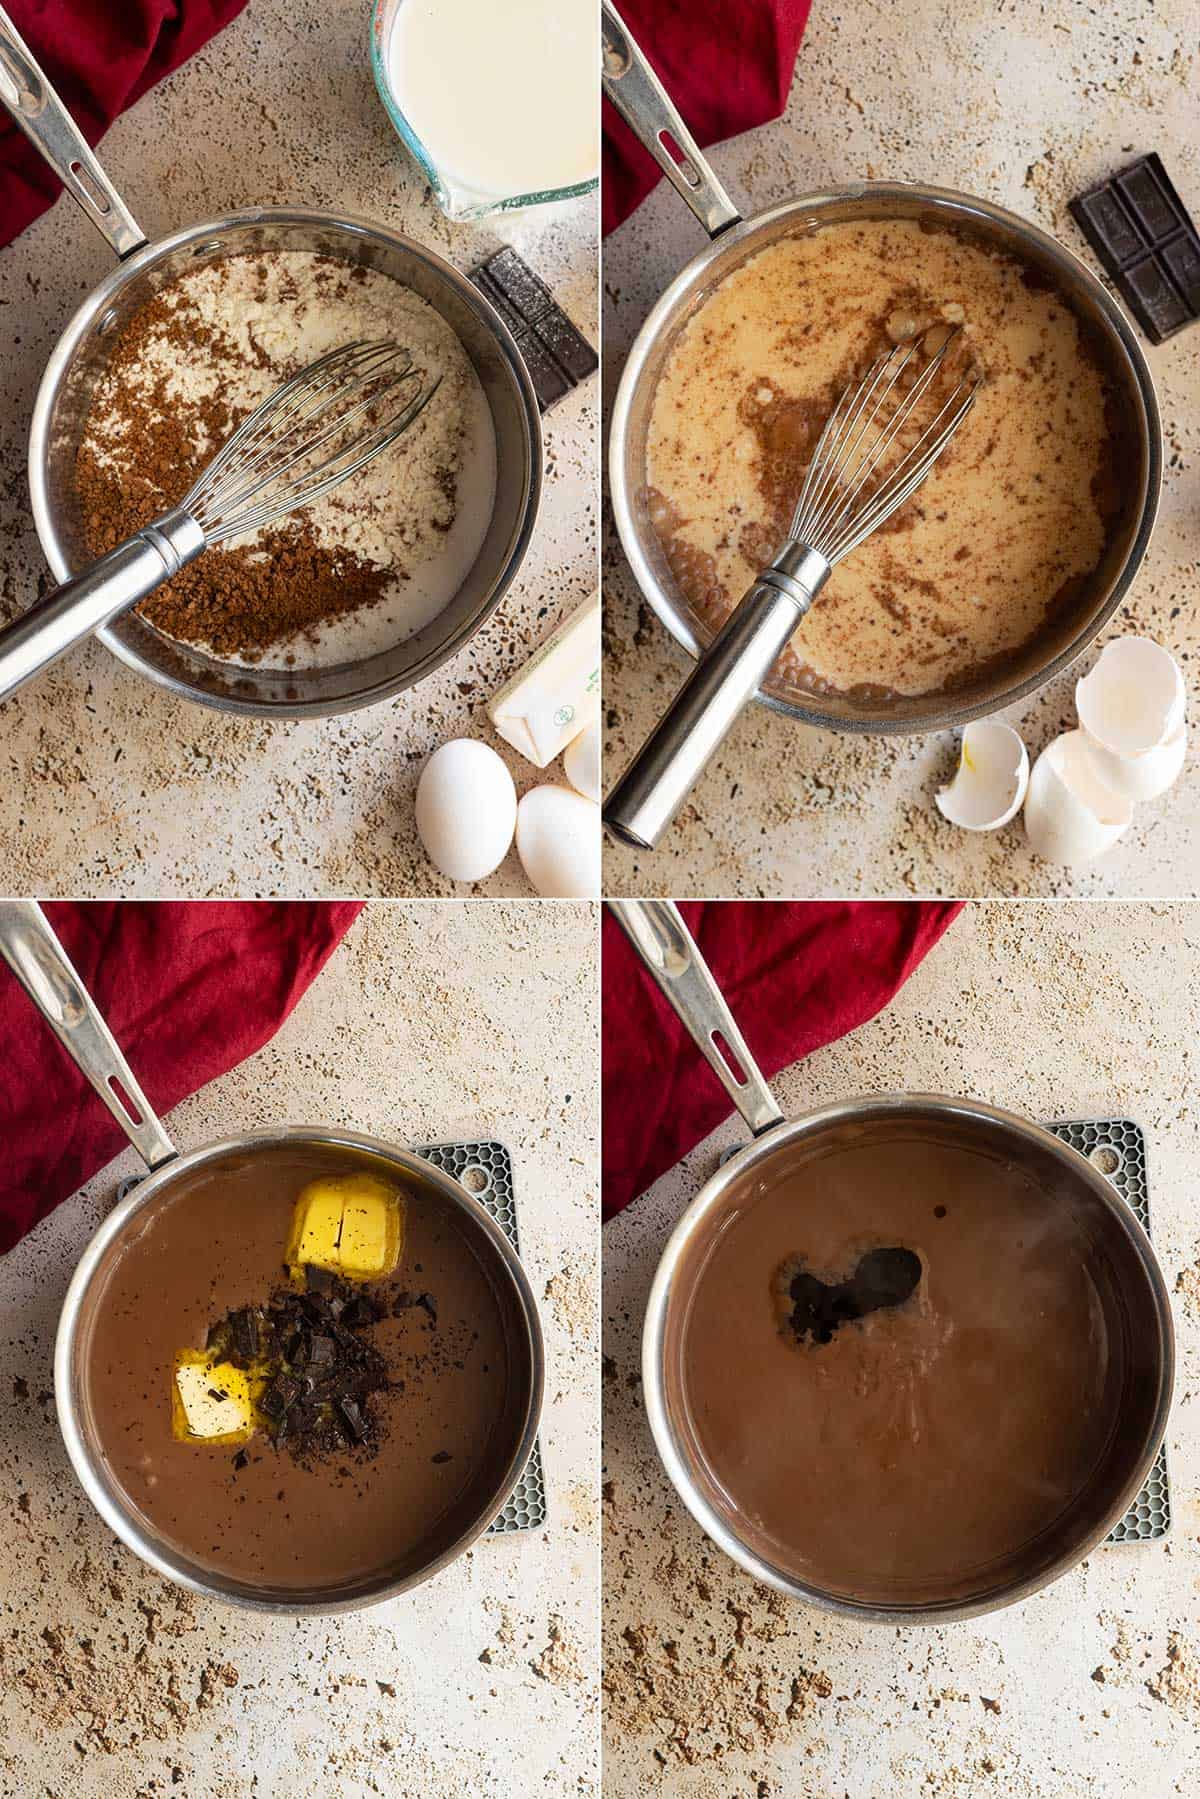 Four pictures showing how to make dark chocolate pudding. 